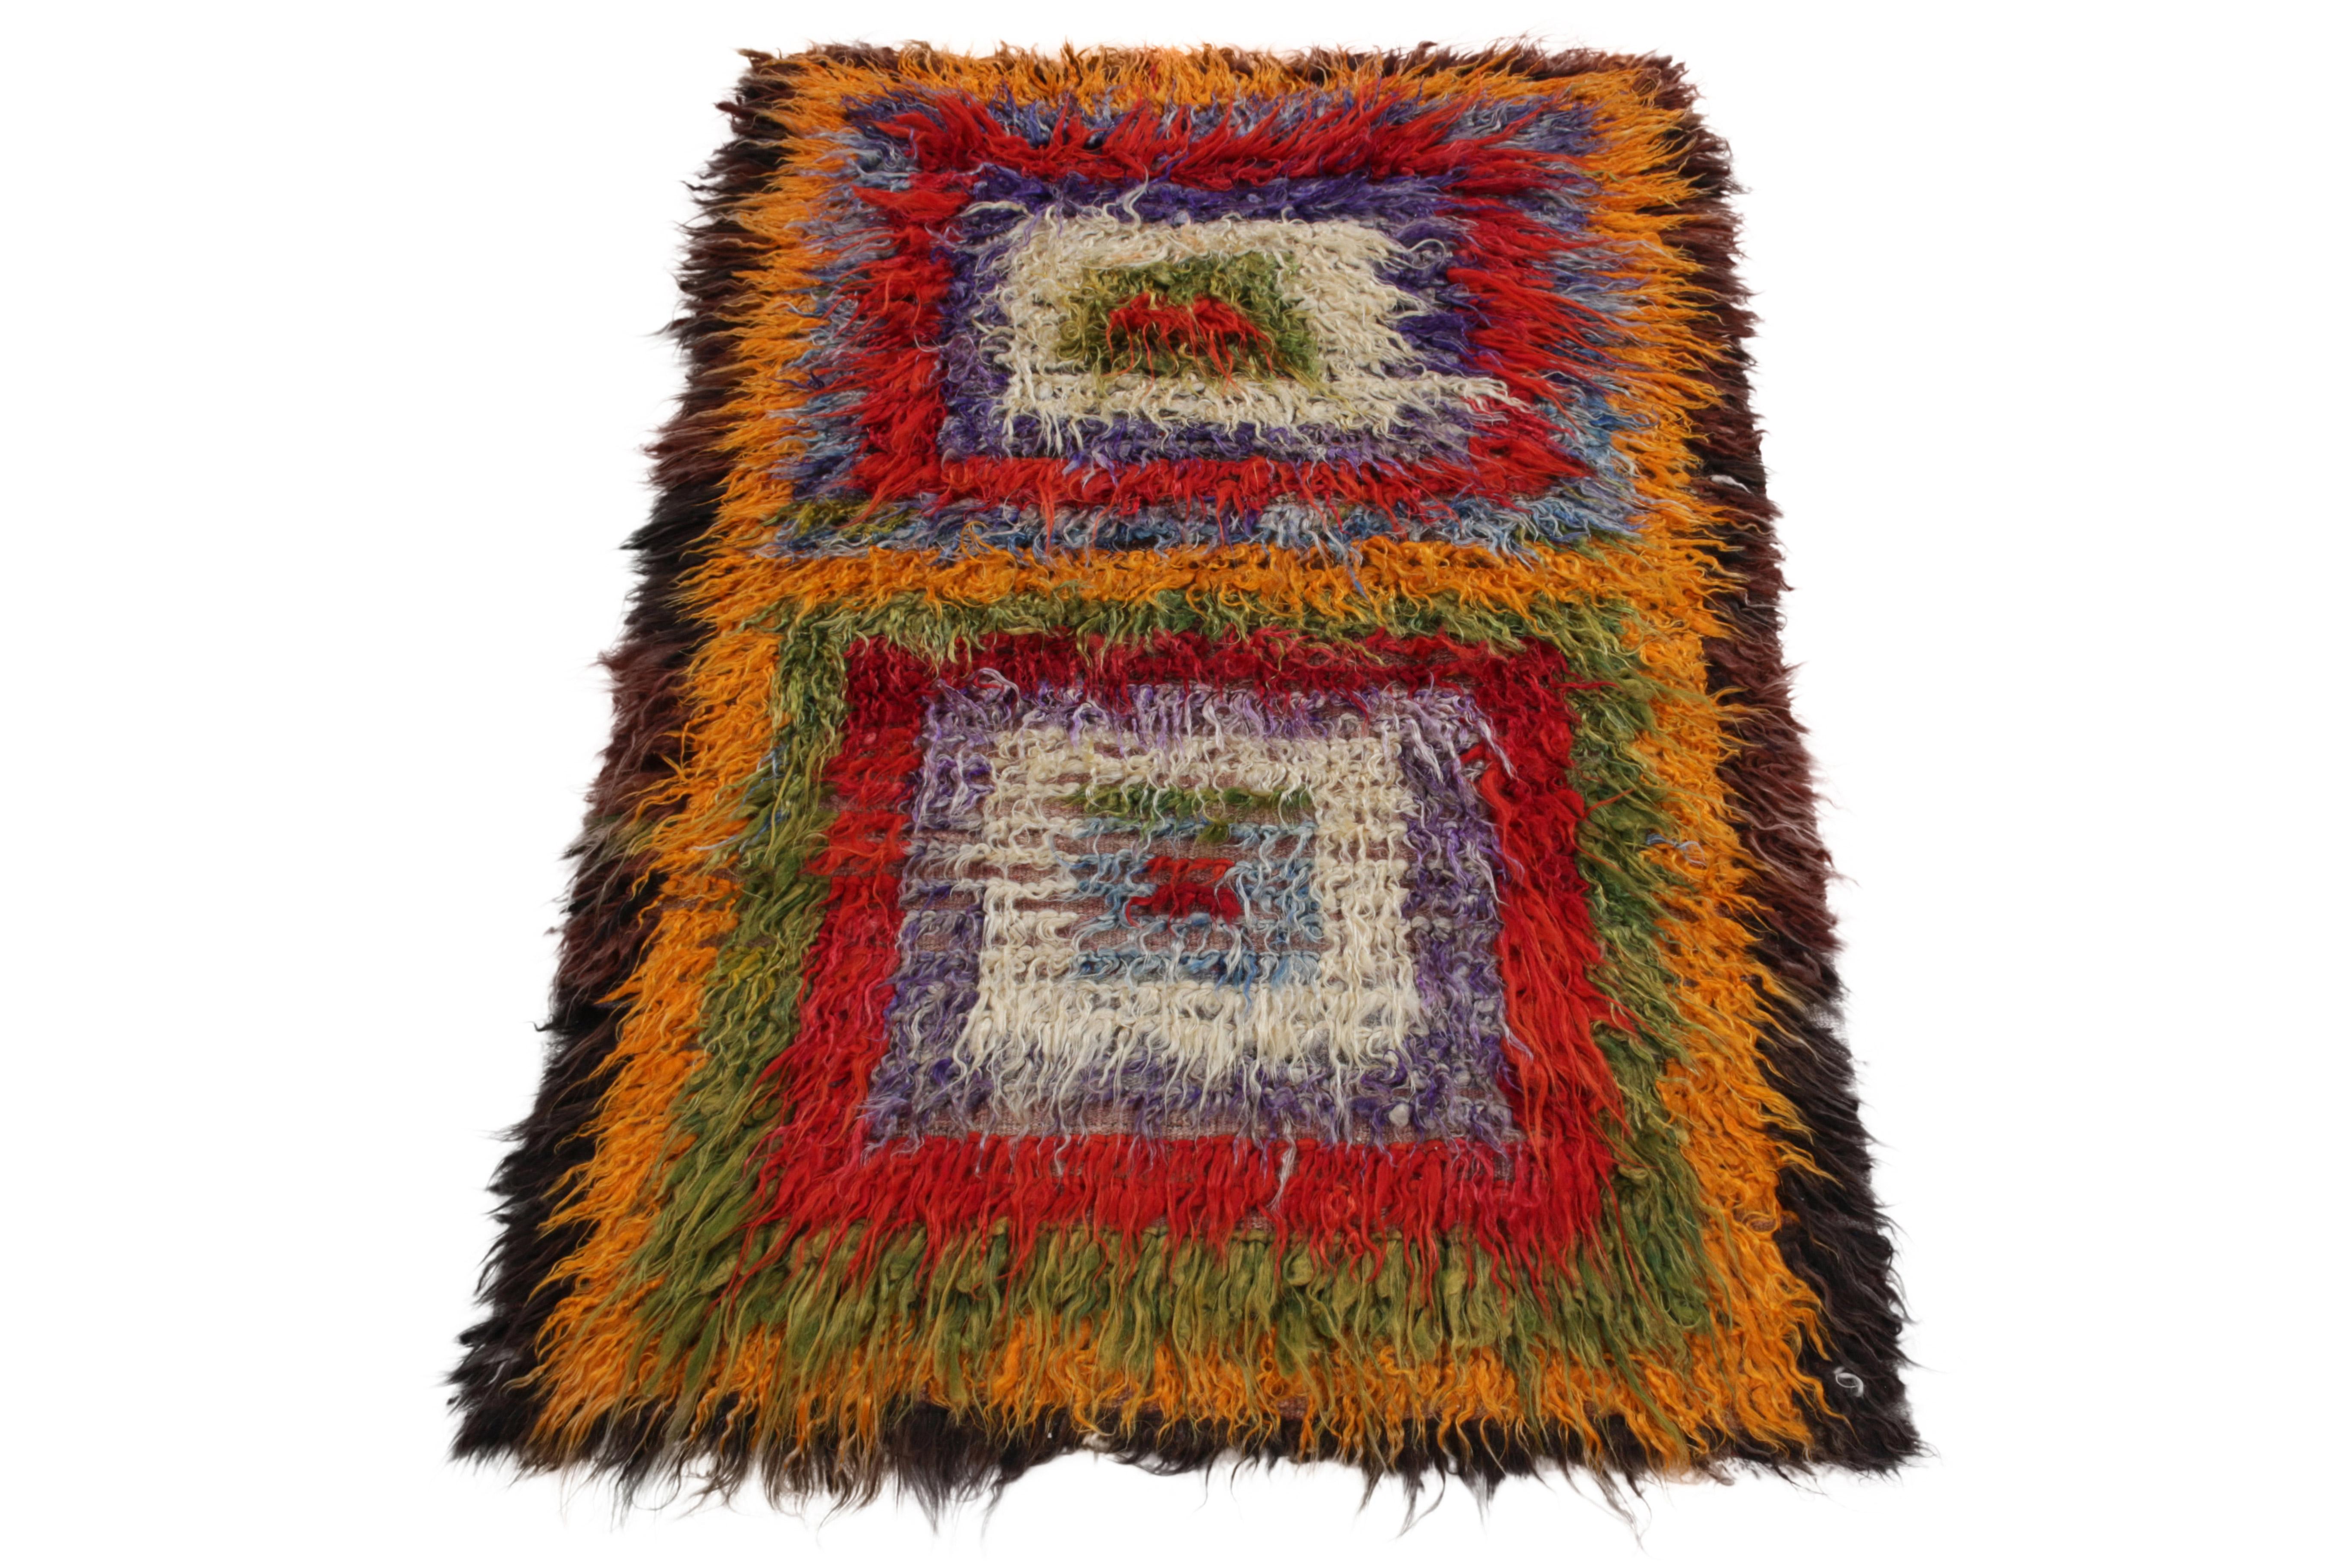 Coming from Turkey circa 1950-1960, this 4x7 vintage shag rug enjoys a resplendent high pile in ink blue, bright red, white, tangerine & pista green complementing geometric sensibilities of Tulu lineage in high-low texturability of the mid century